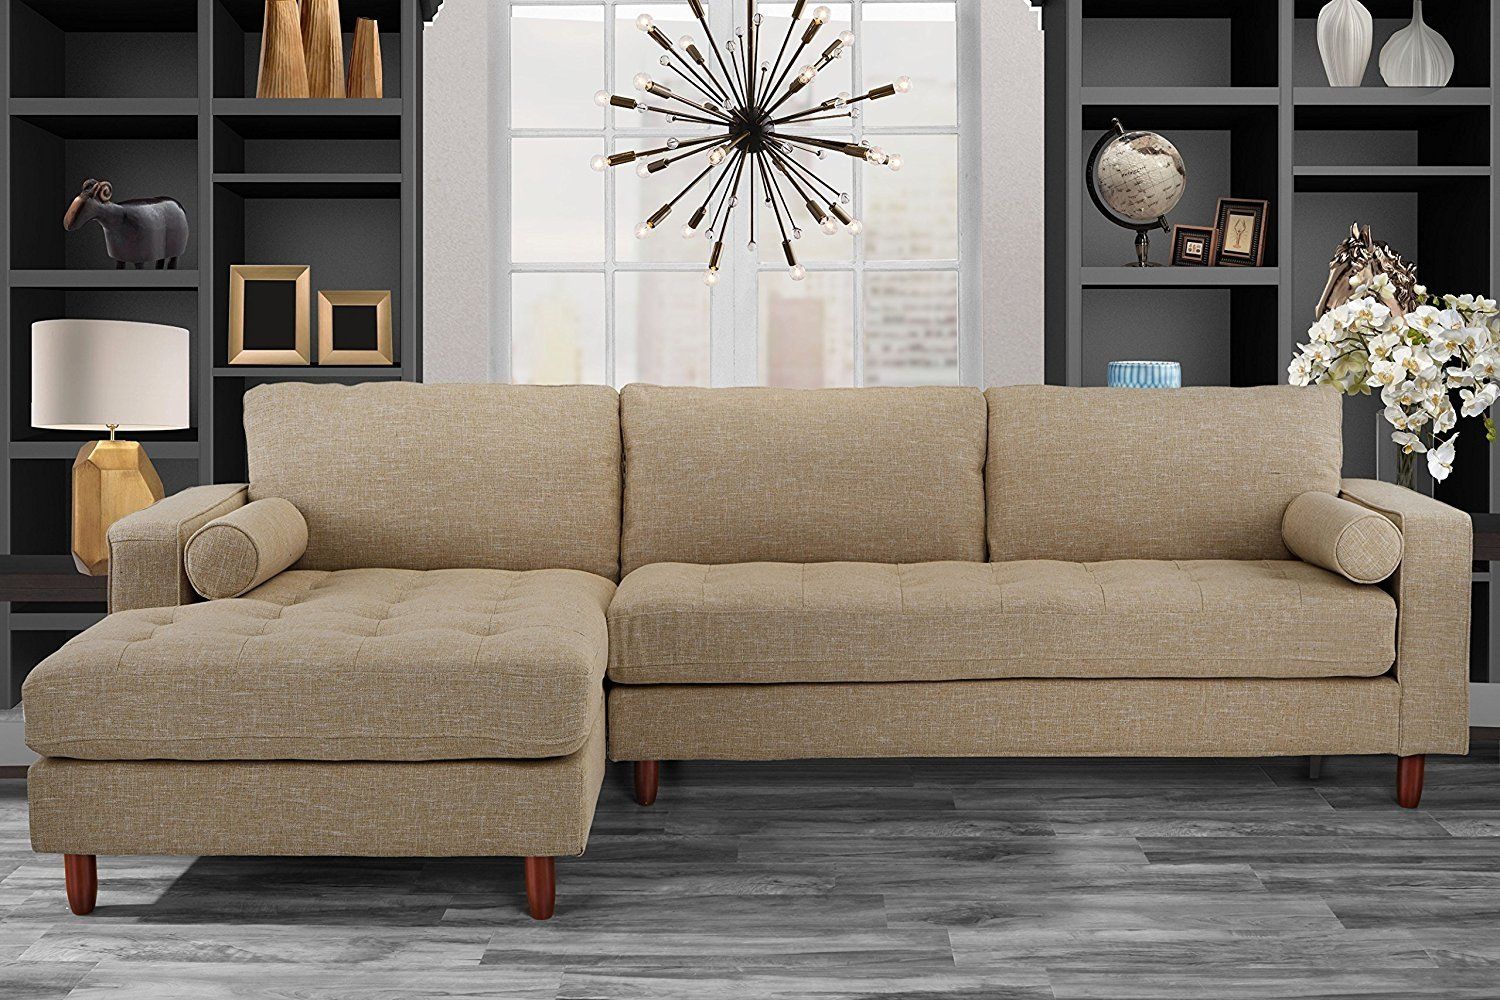 Mid Century Modern Tufted Fabric Sectional Sofa, L Shape Couch Beige With Regard To Modern L Shaped Sofa Sectionals (View 8 of 20)